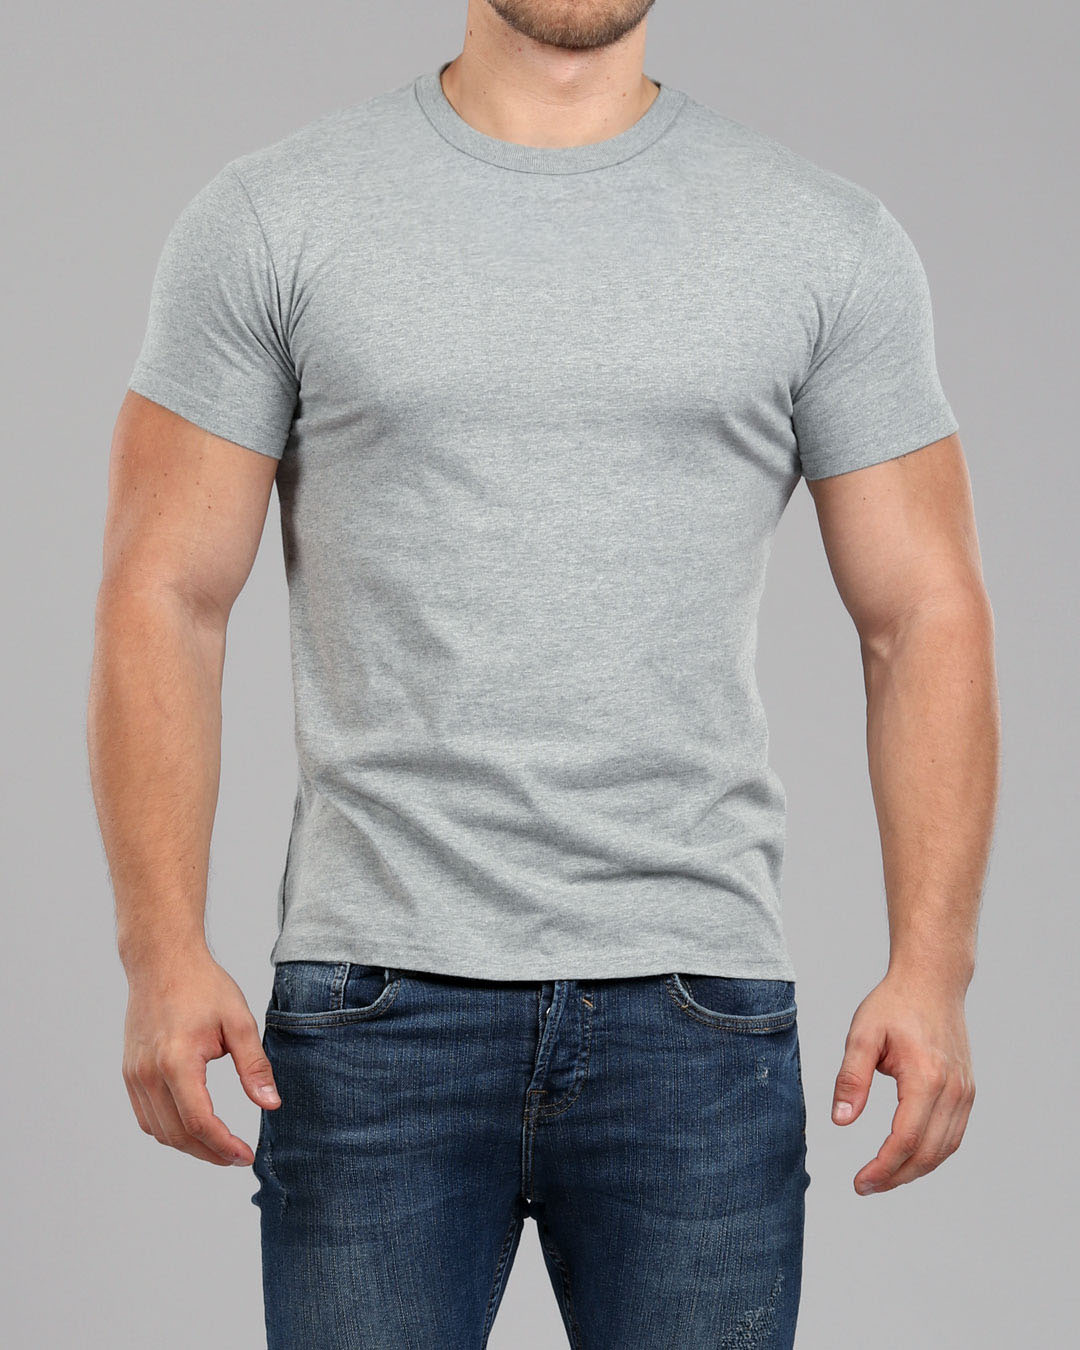 Men's Heather Grey Crew Neck Fitted Plain T-Shirt | Muscle Fit Basics